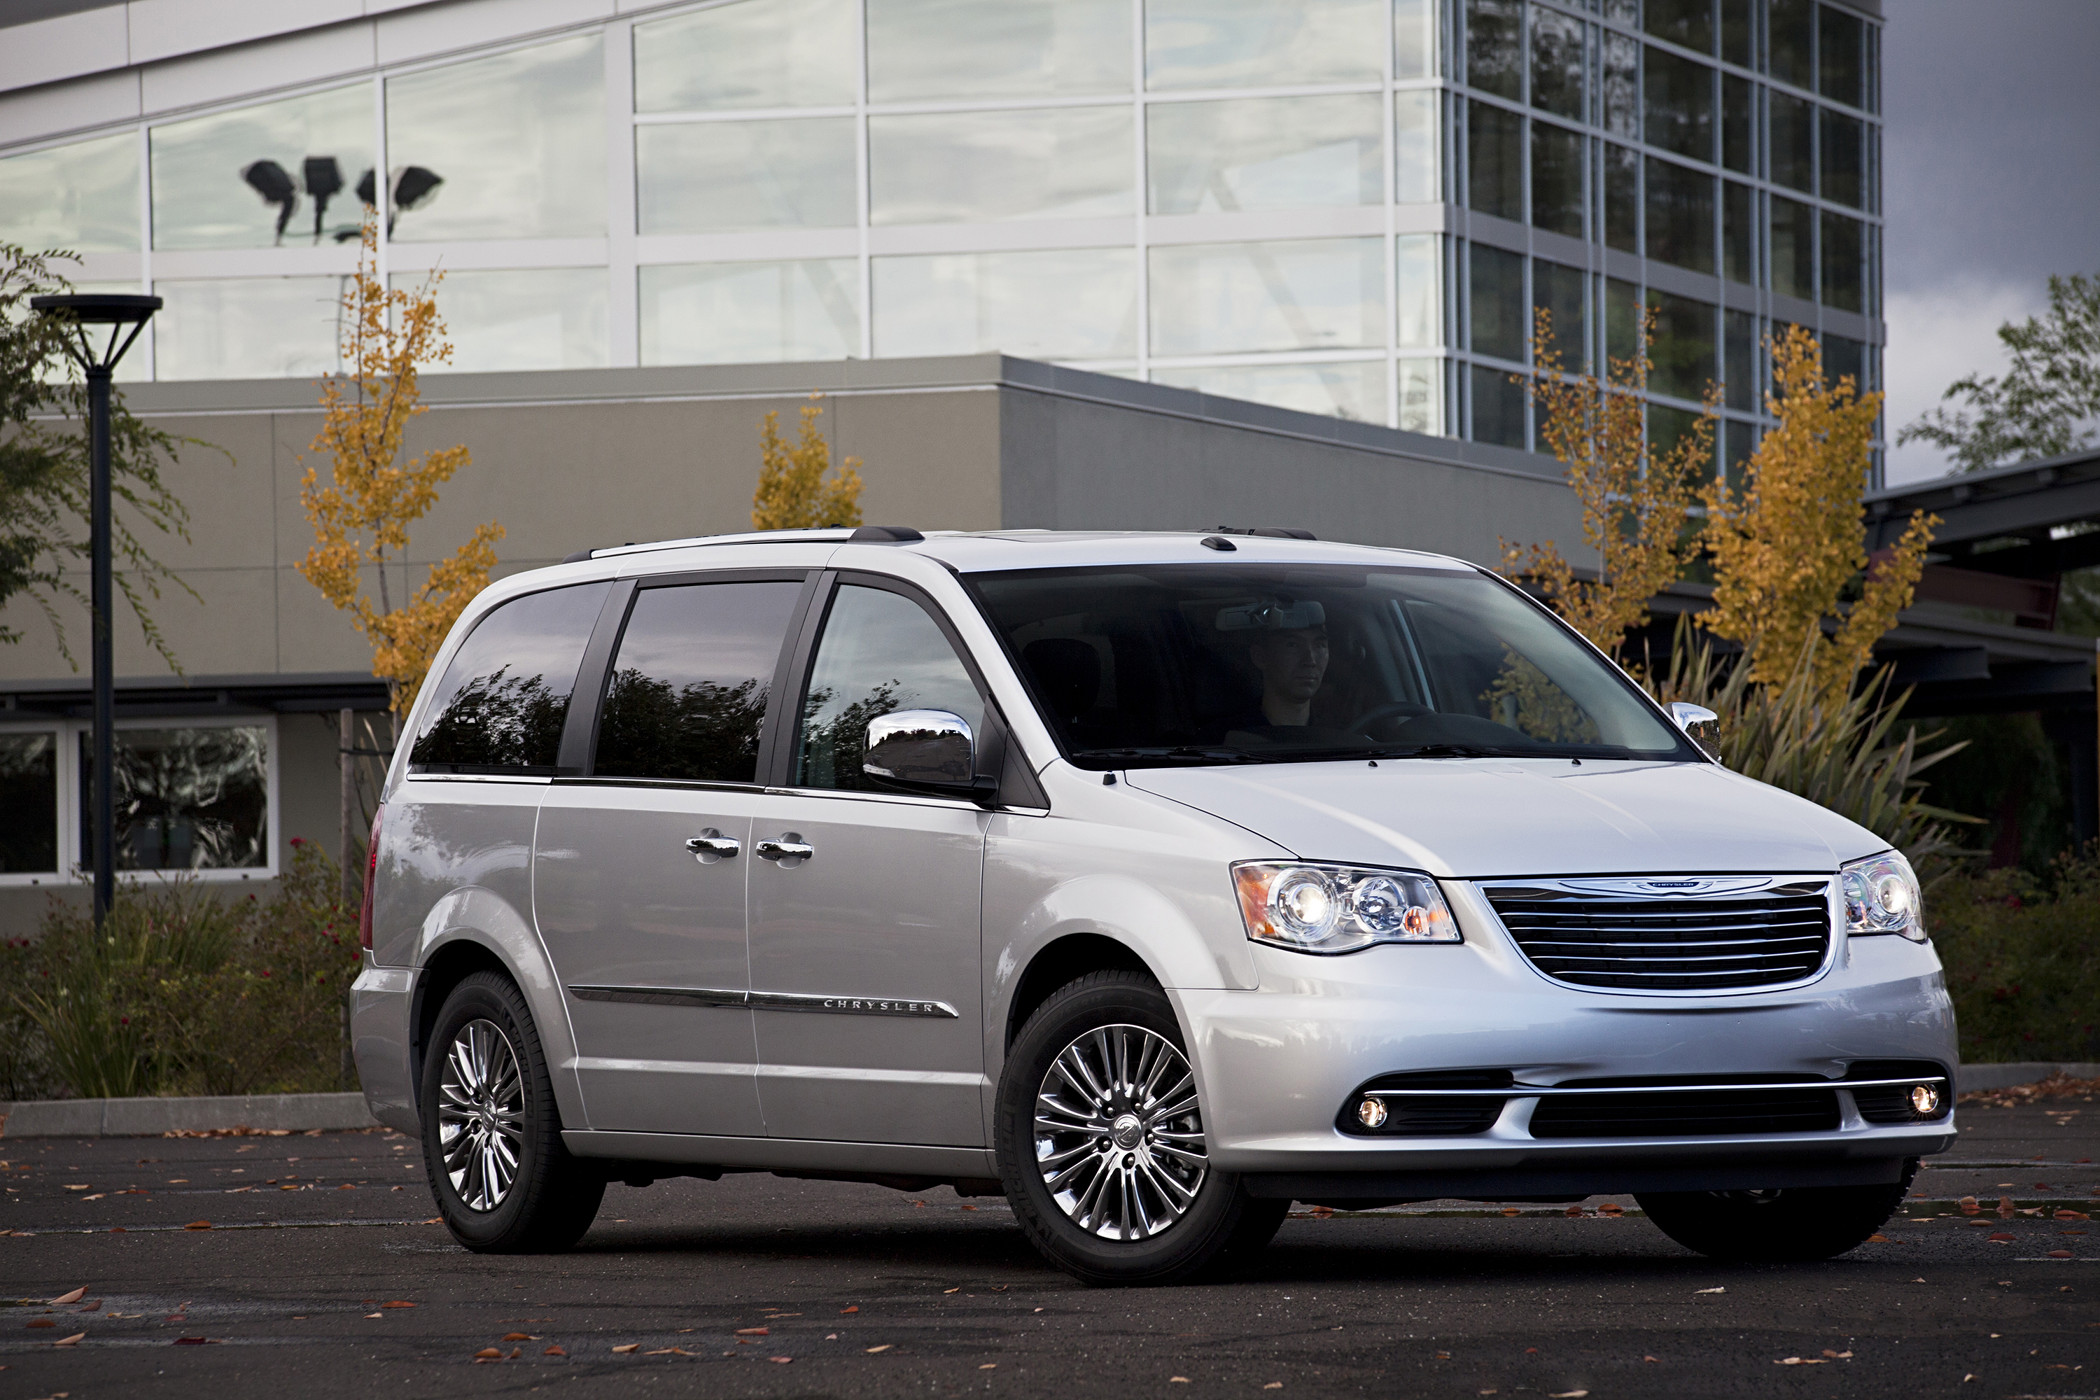 2011 Chrysler town and country touring van